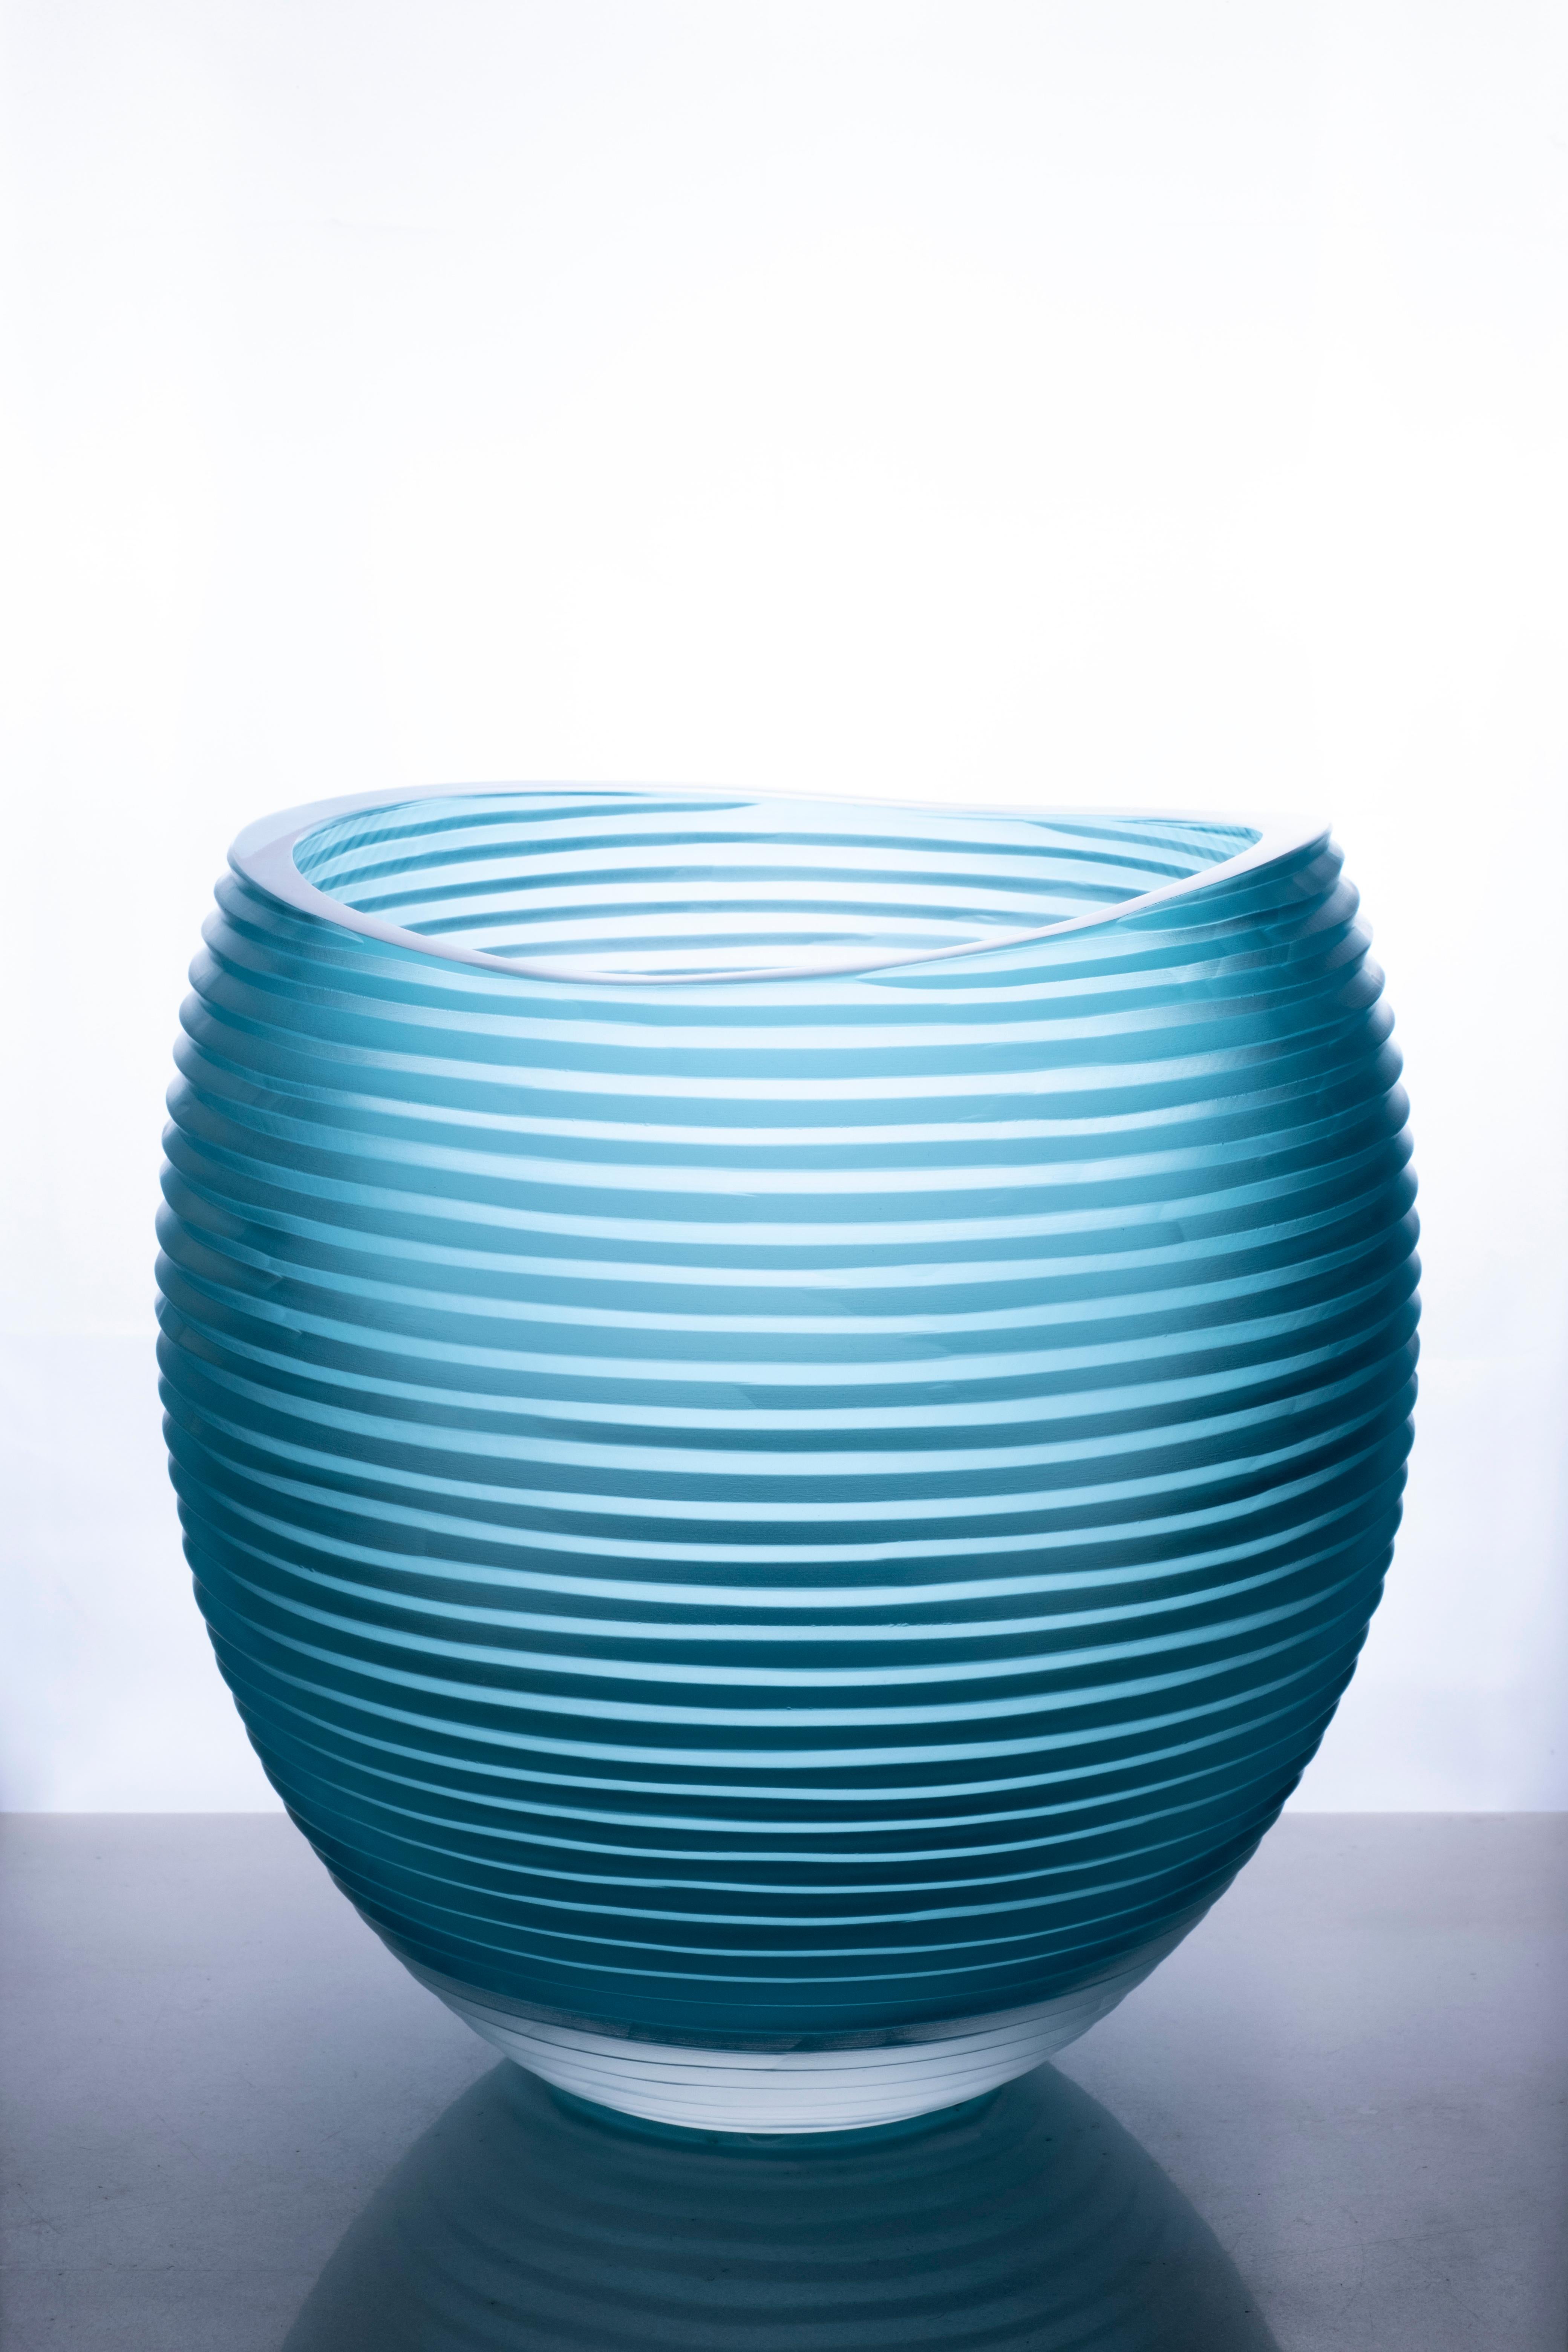 Incisioni Linae large vase by Purho
Dimensions: D 22 x H 35 cm.
Materials: glass.
Other colors and dimensions are available.

Purho is a new protagonist of made in Italy design, a work of synthesis, a research that has lasted for years, an